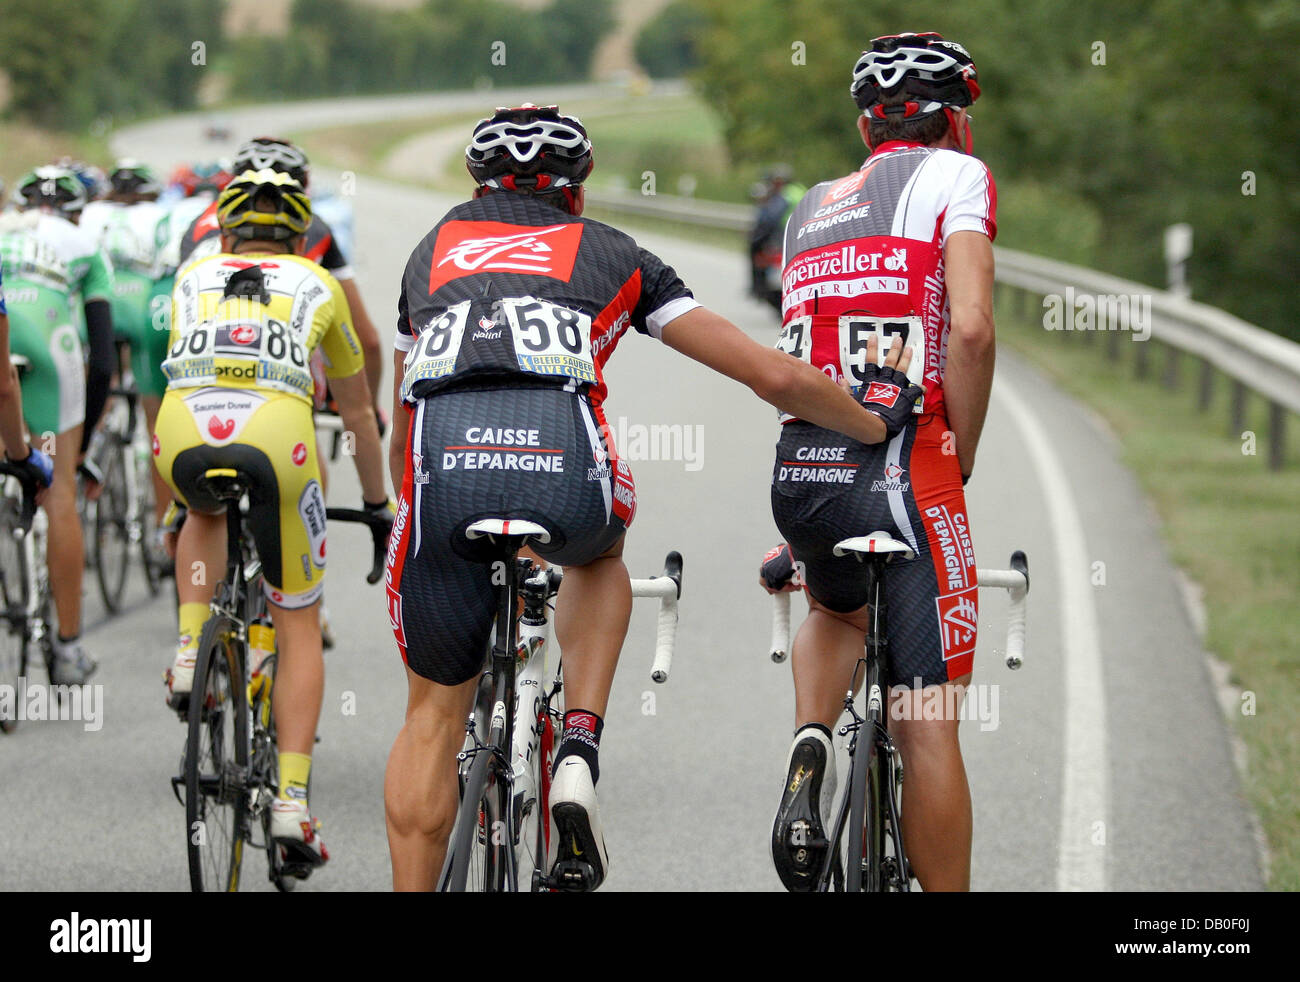 Spanish cyclist Luis Leon Gil Sanchez (C) pushes fellow-countryman and teammate Jopse Rojas Gil (R) of Team Caisse d'Epargne for him to rest during the seventh stage of the 'Germany Tour' in Regensburg, Germany, 16 August 2007. The seventh stage covers the 192.2 kilometres distance between Ausrian Kufstein and Regensburg. The Germany Tour leads in nine stages over 1,292.5 kilometre Stock Photo